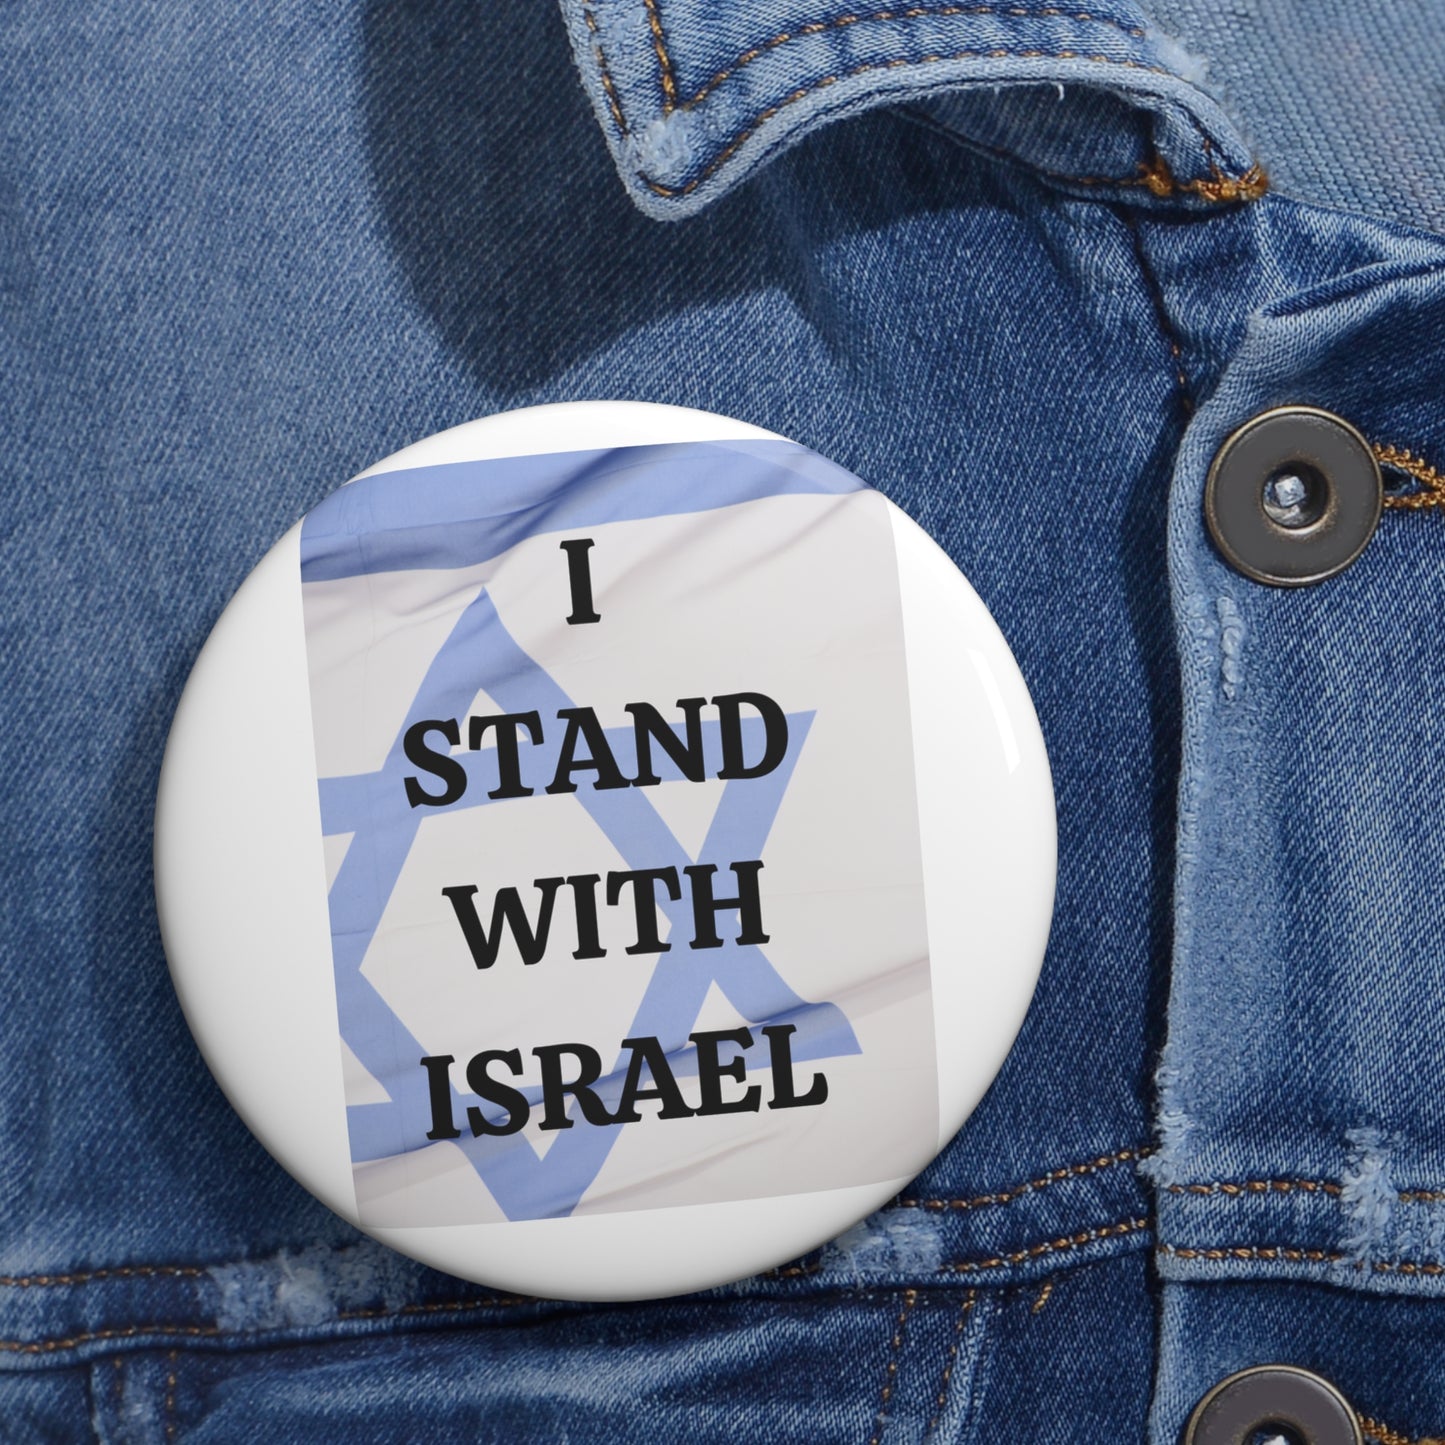 I stand with Israel - Pin Buttons